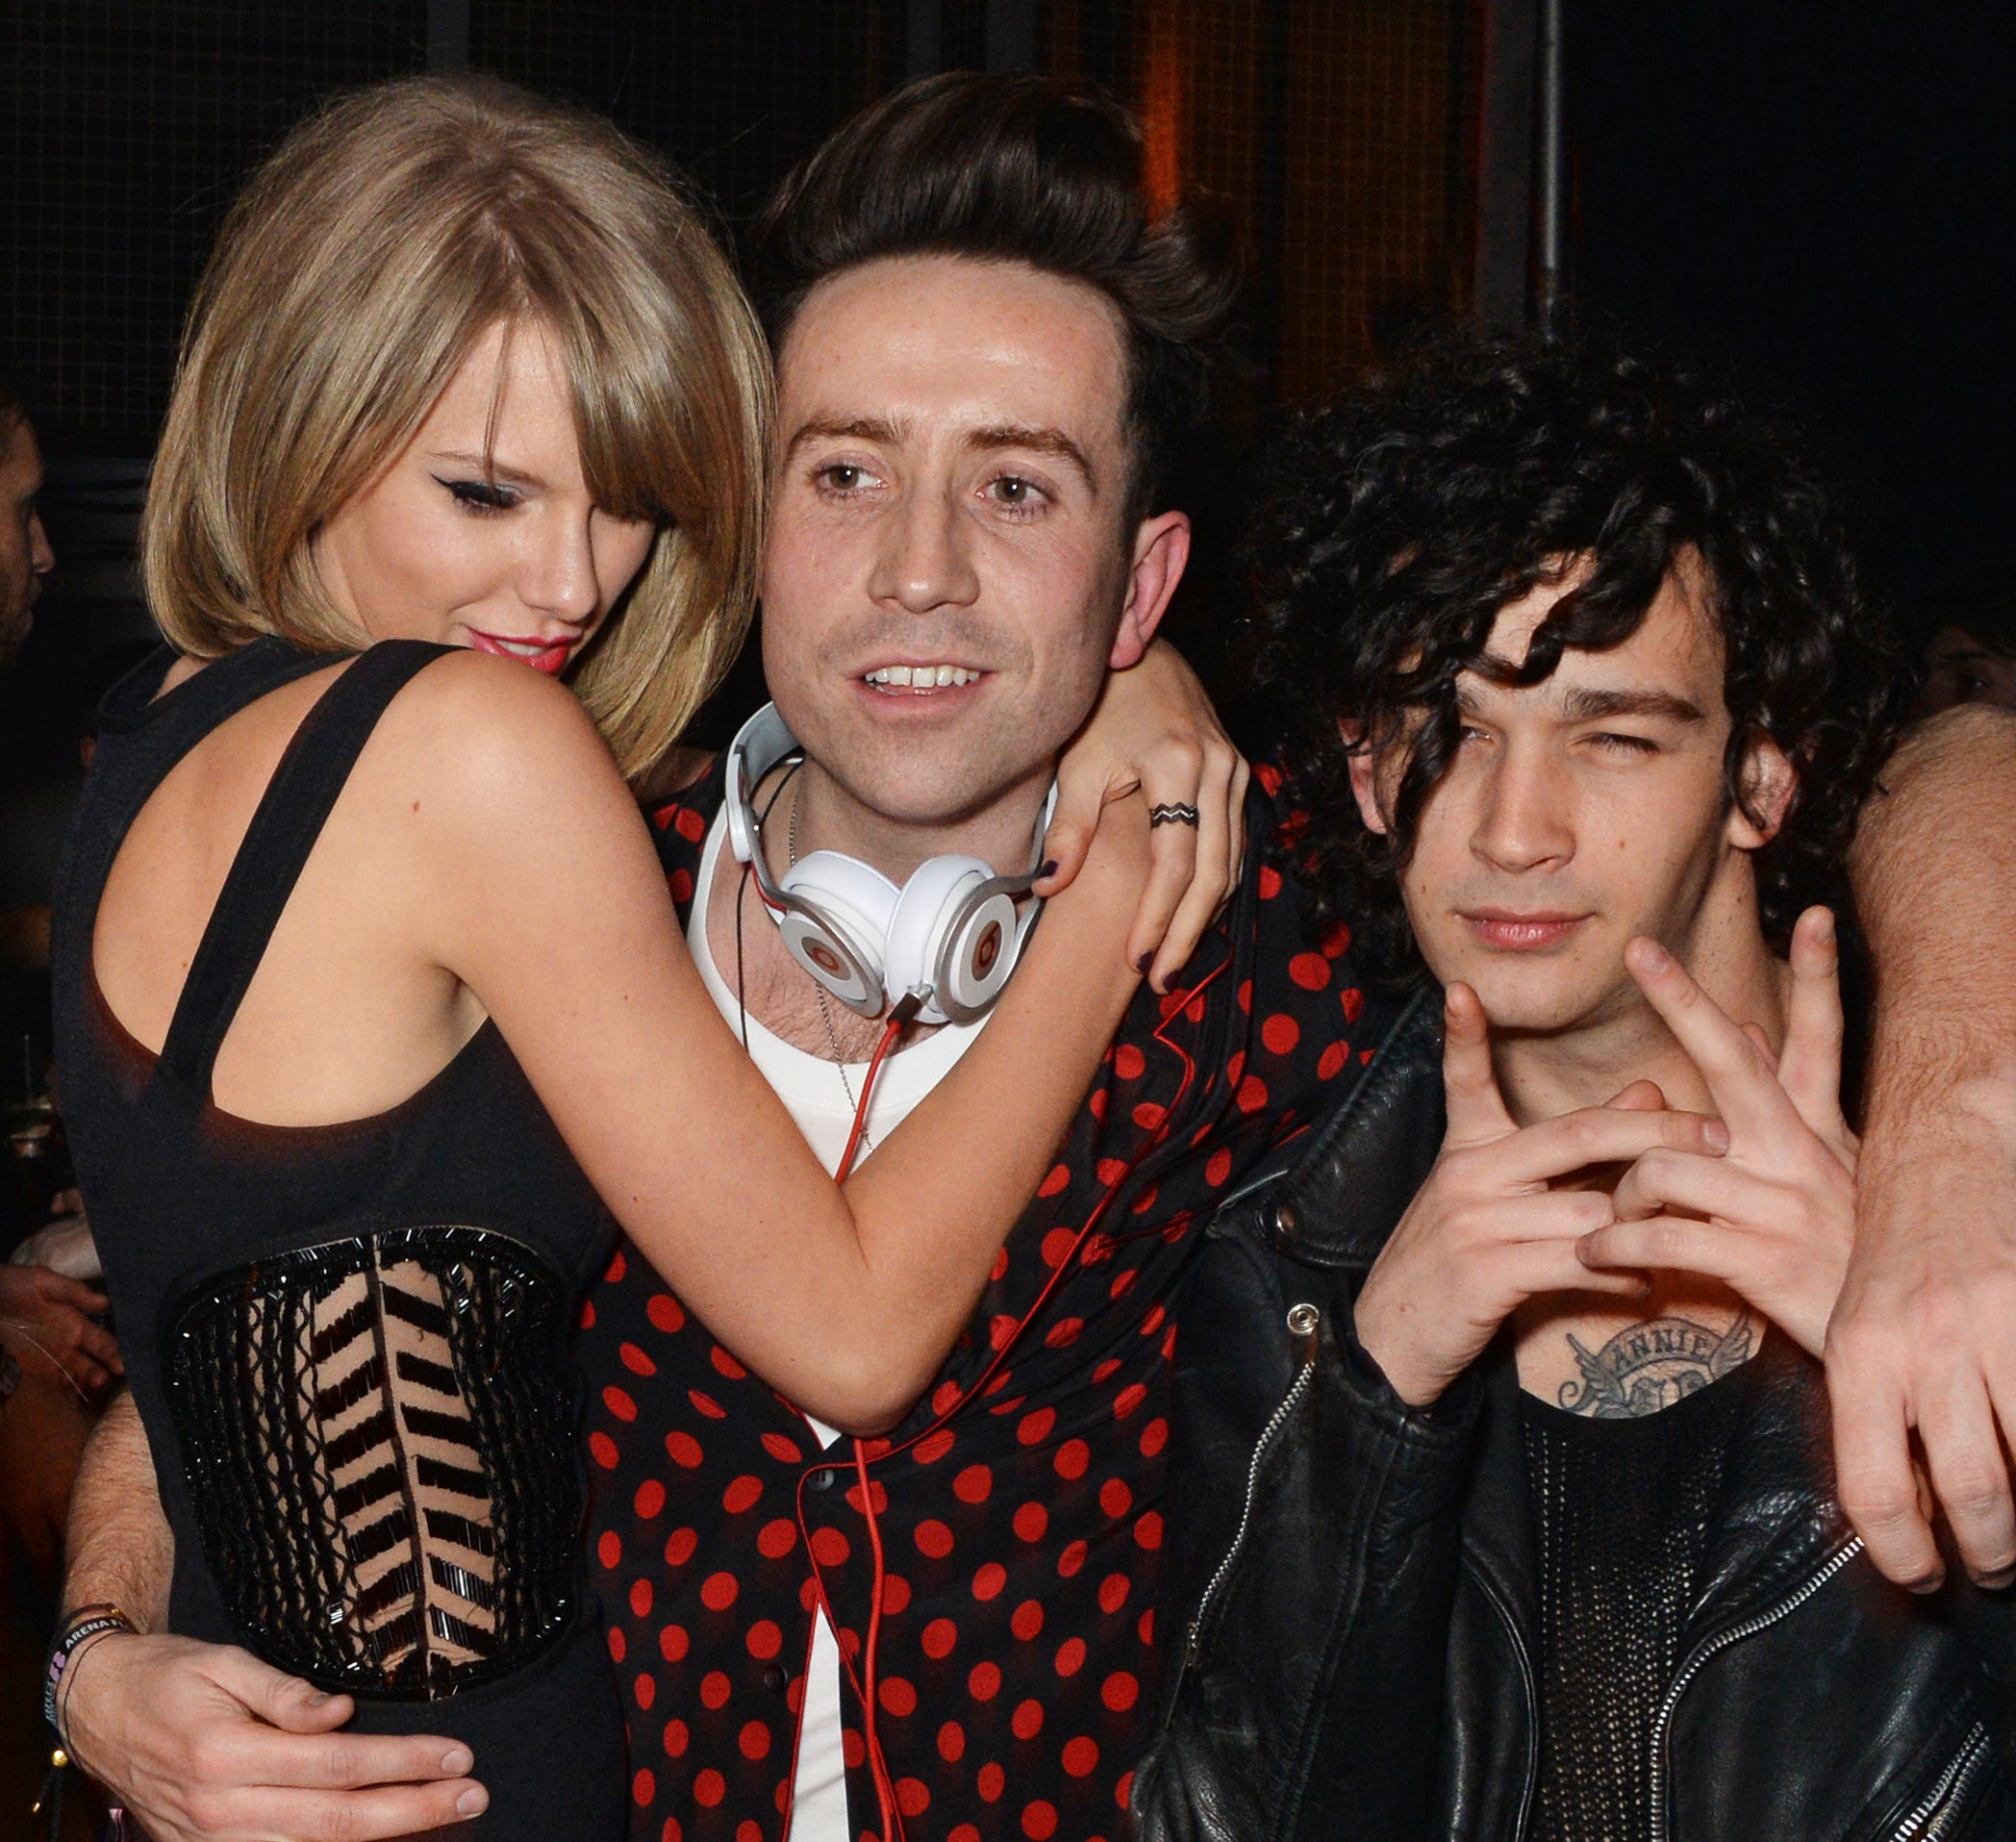 Taylor with Matty Healy and another gentleman